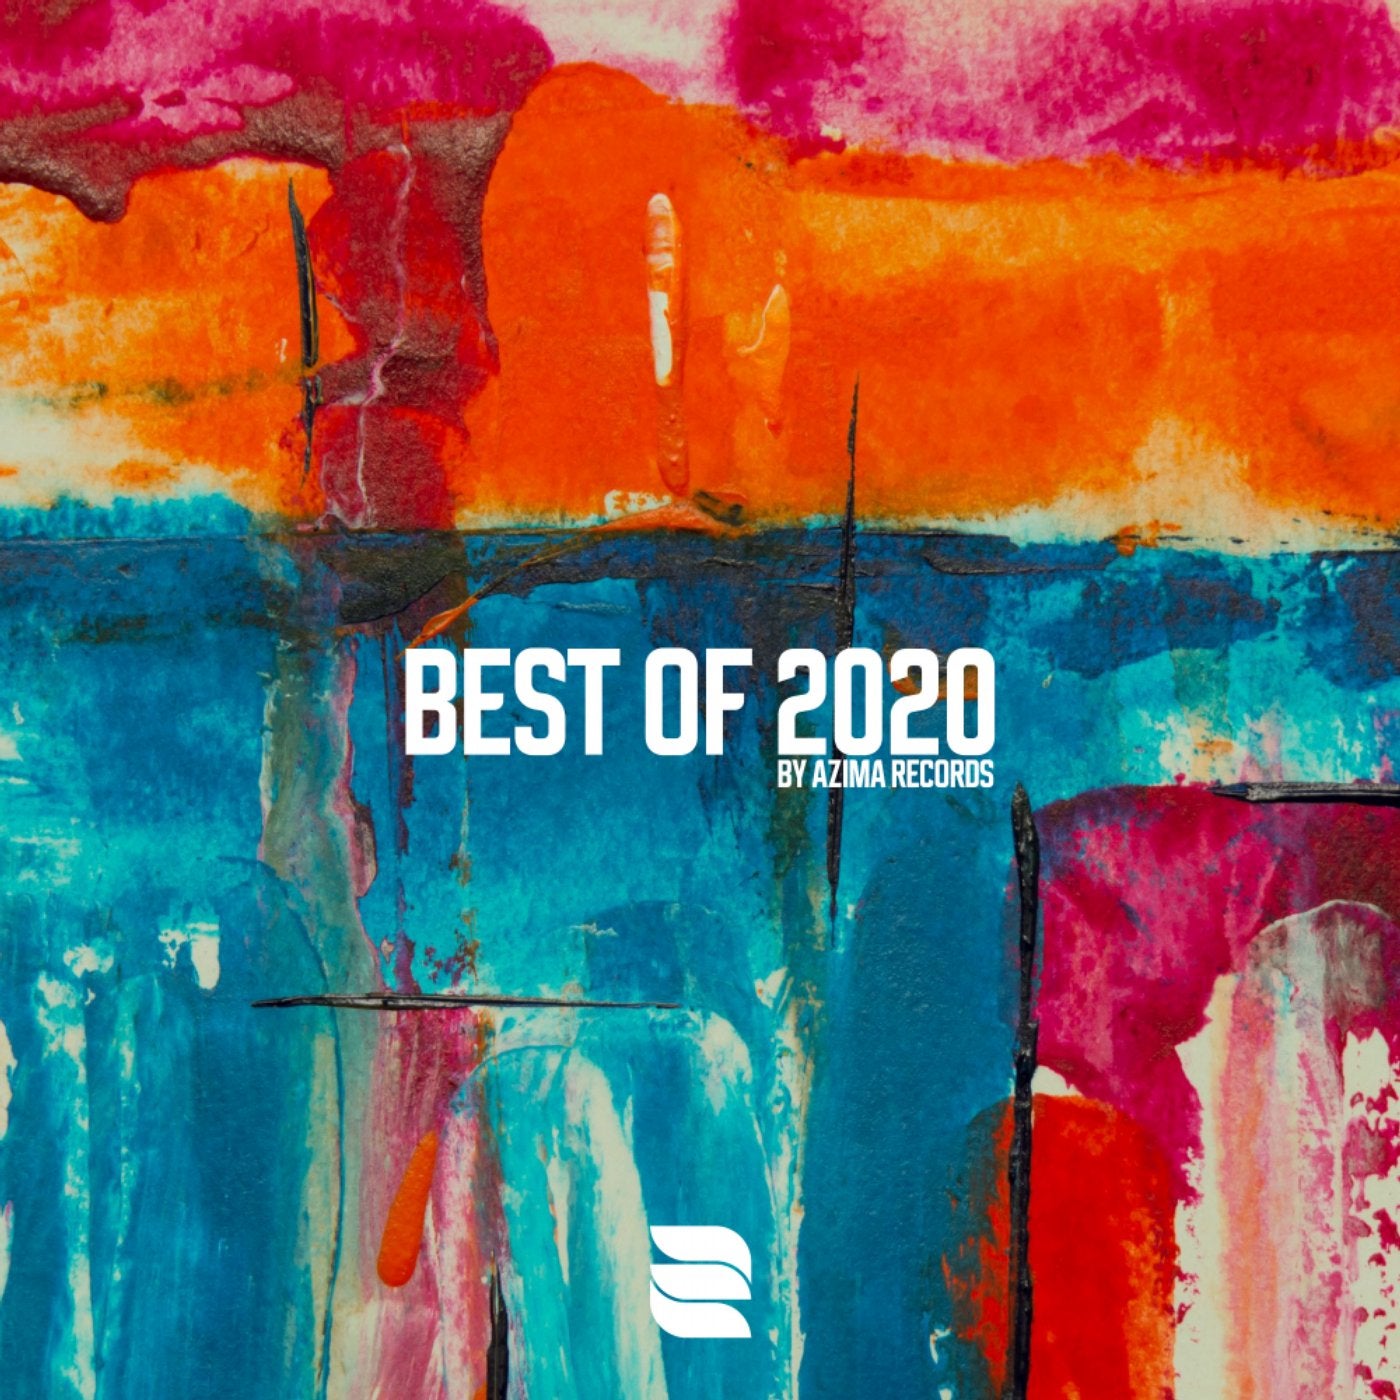 Best of 2020 by Azima Records